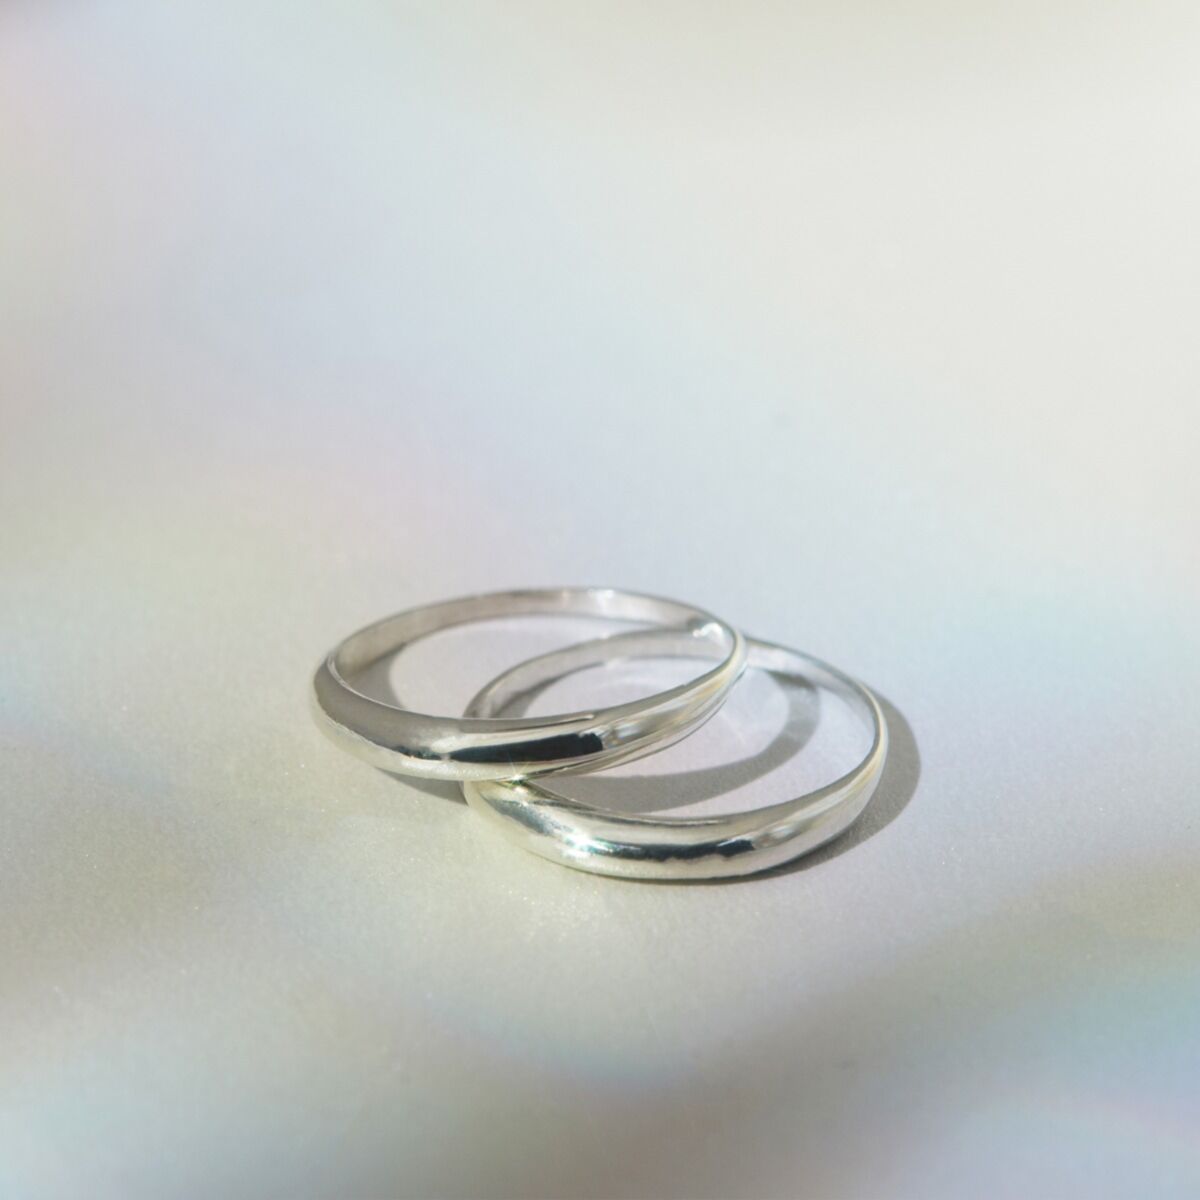 Product Image for Barnes Ring, Sterling Silver